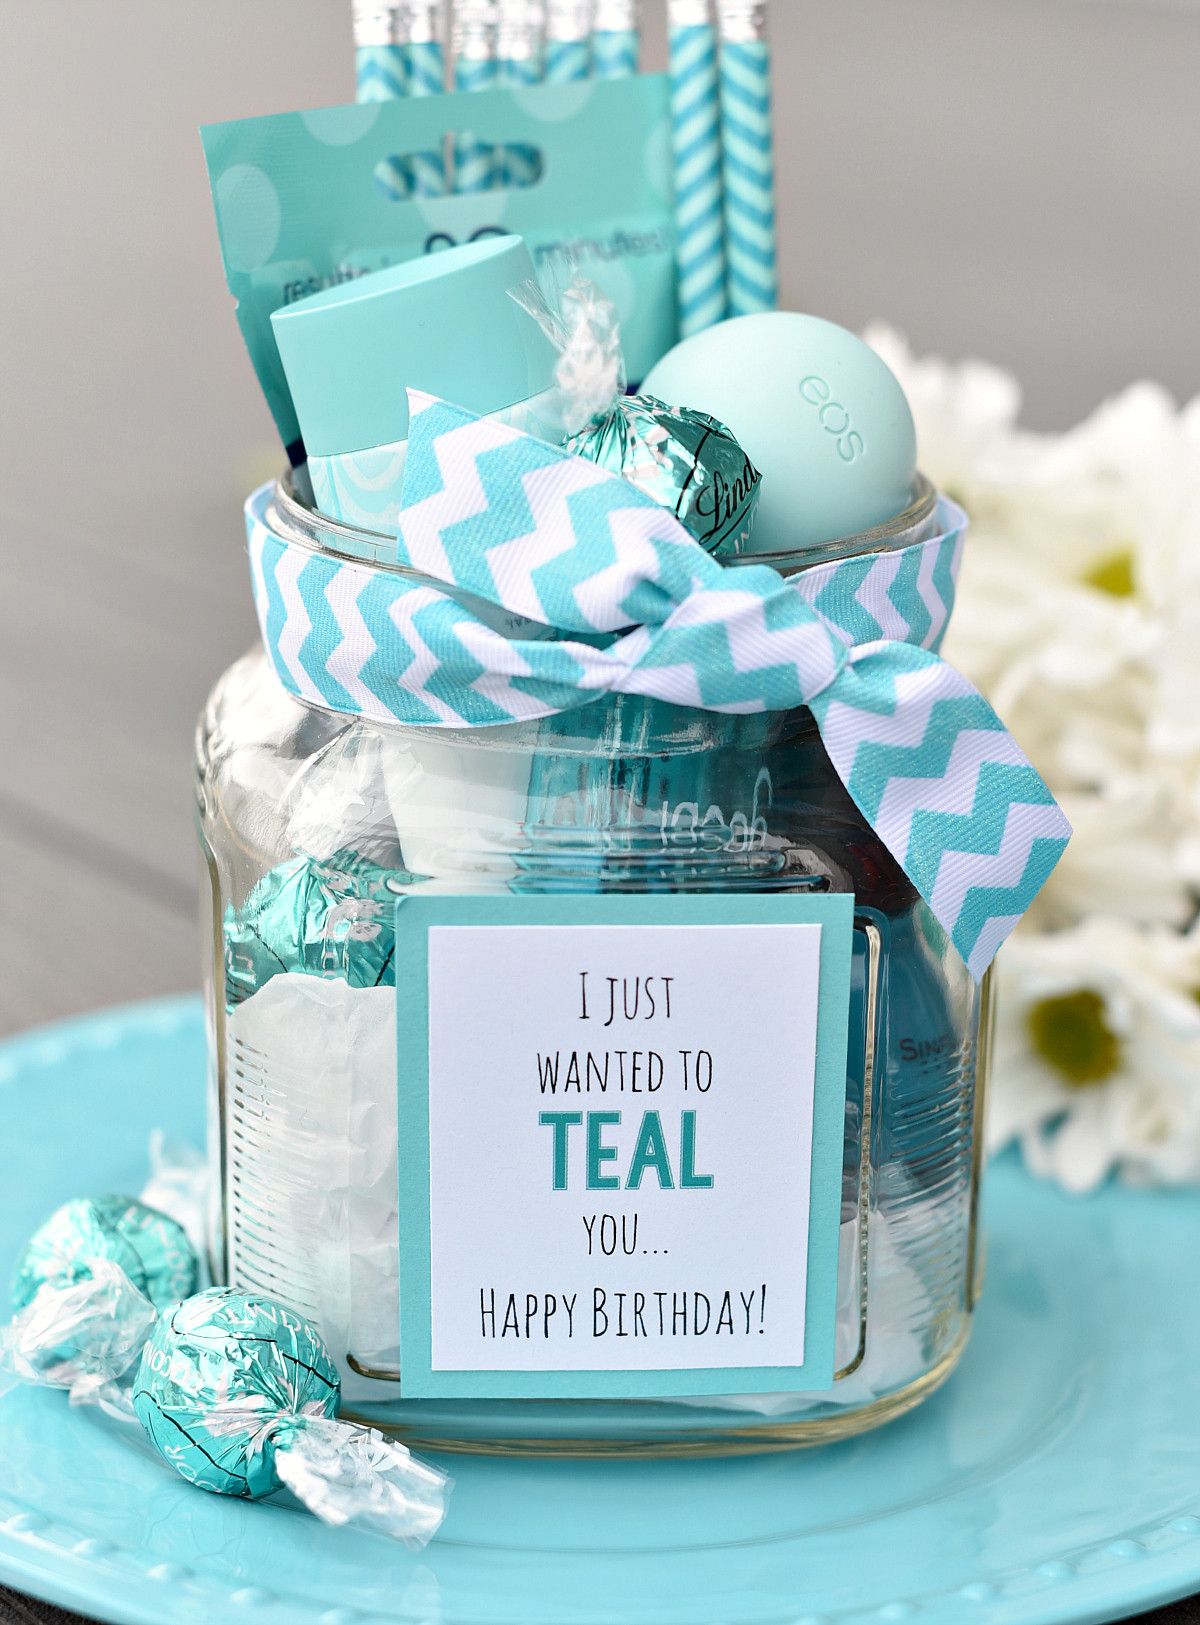 Birthday Gifts For A Friend
 Teal Birthday Gift Idea for Friends – Fun Squared